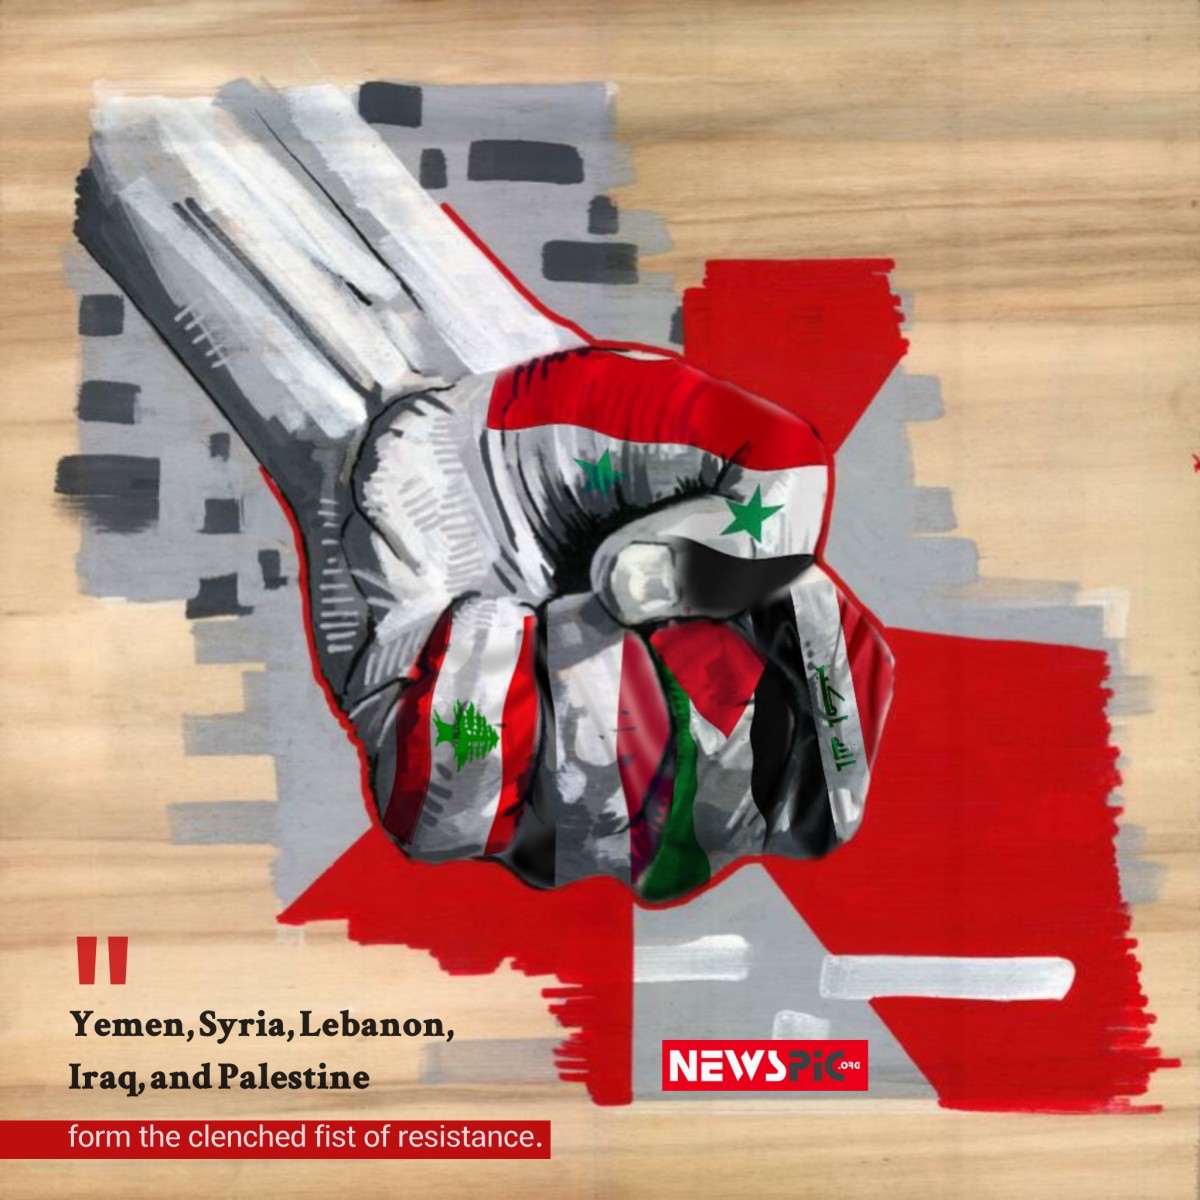 Yemen, Syria, Lebanon, Iraq, and Palestine form the clenched fist of resistance.